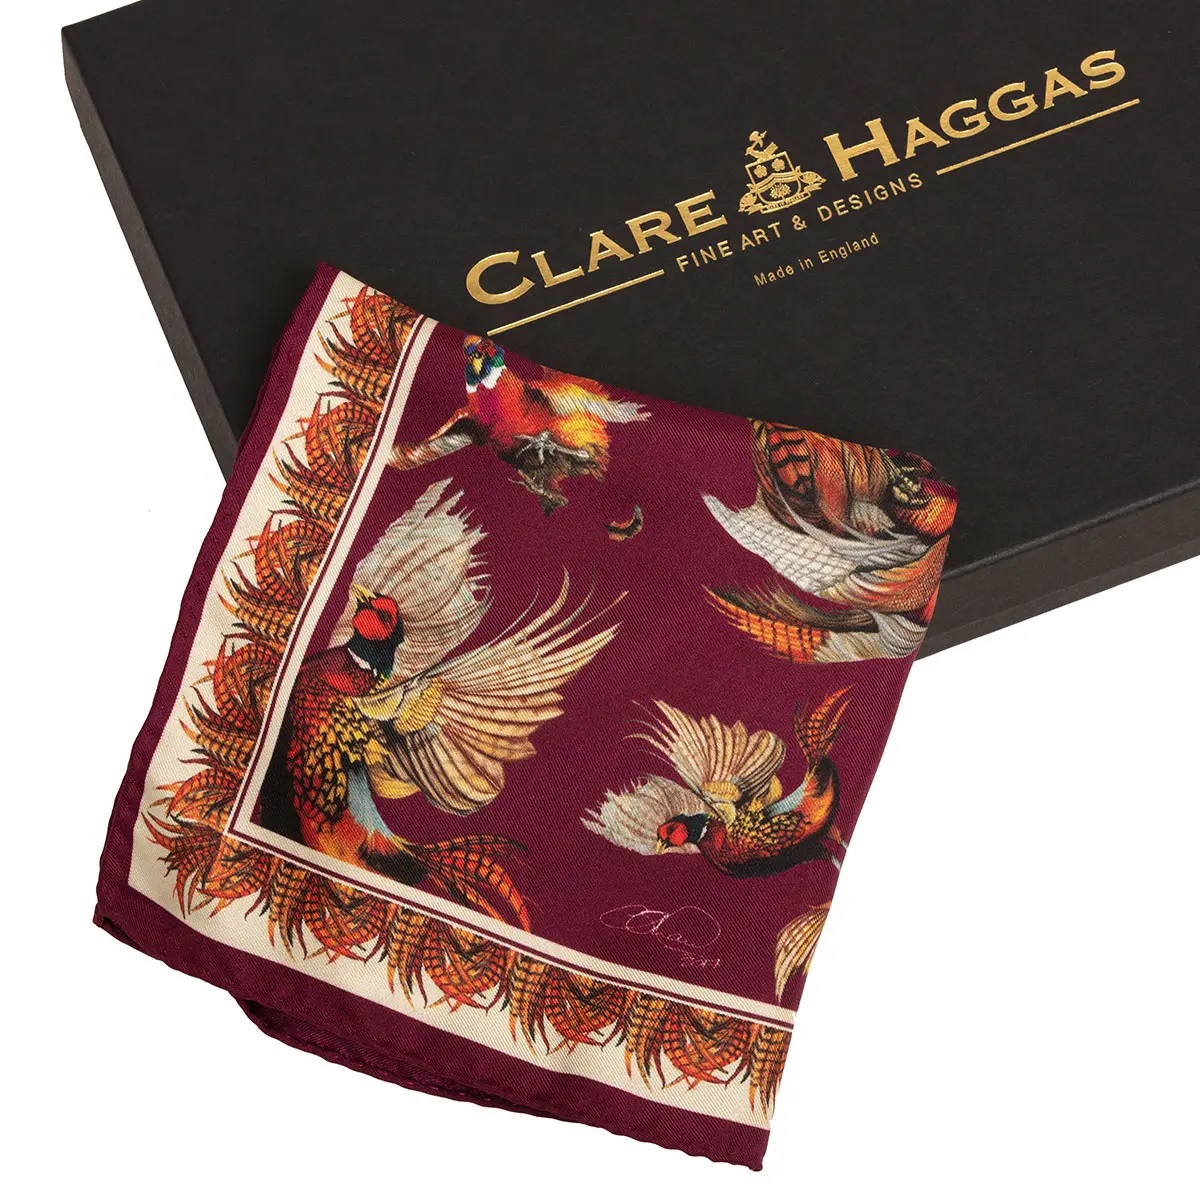 Clare-Haggas-Pocket-Square-Turf-War-Mulberry.jpg